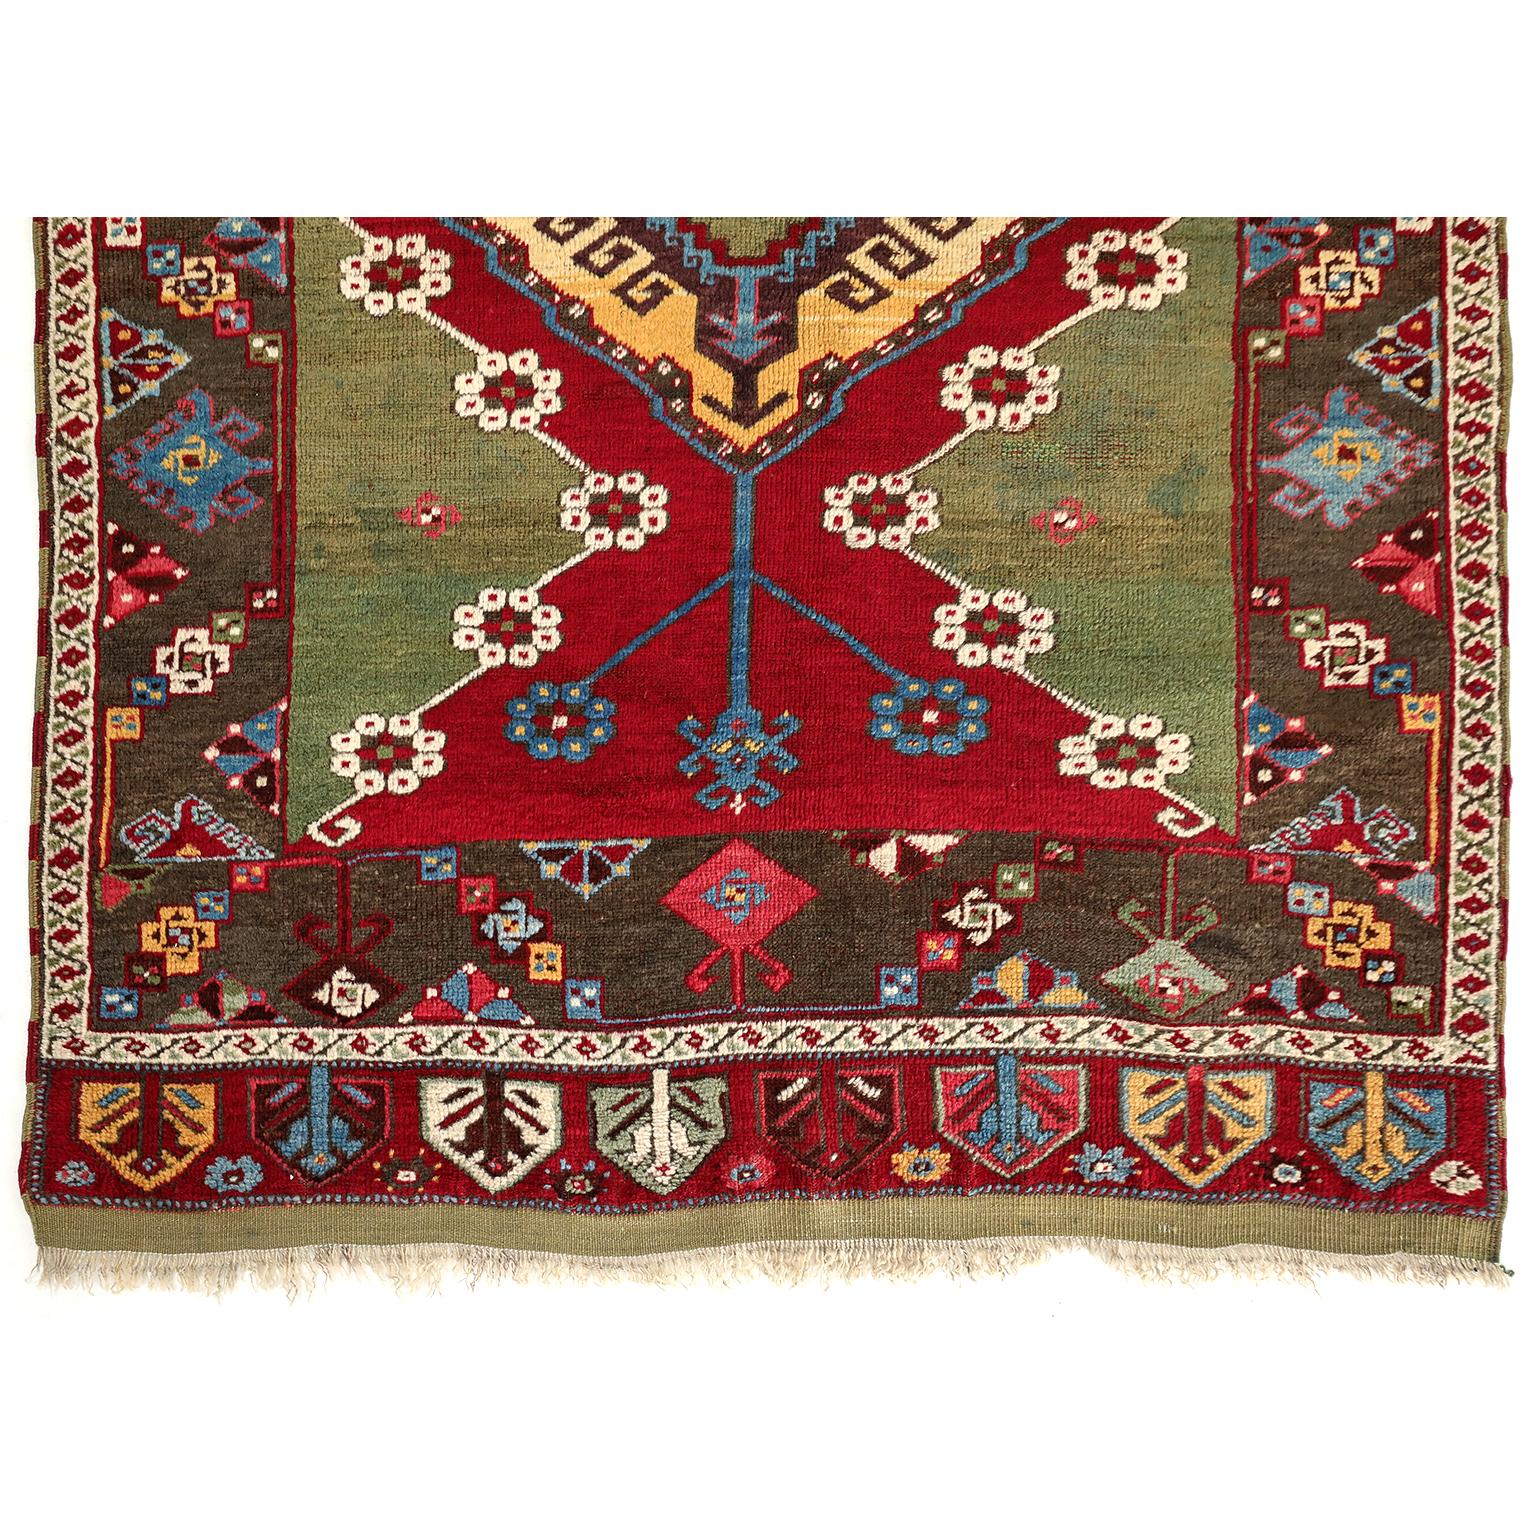 Antique 1920s Wool Turkish Kirsehir Rug, 3' x 5' In Good Condition For Sale In New York, NY